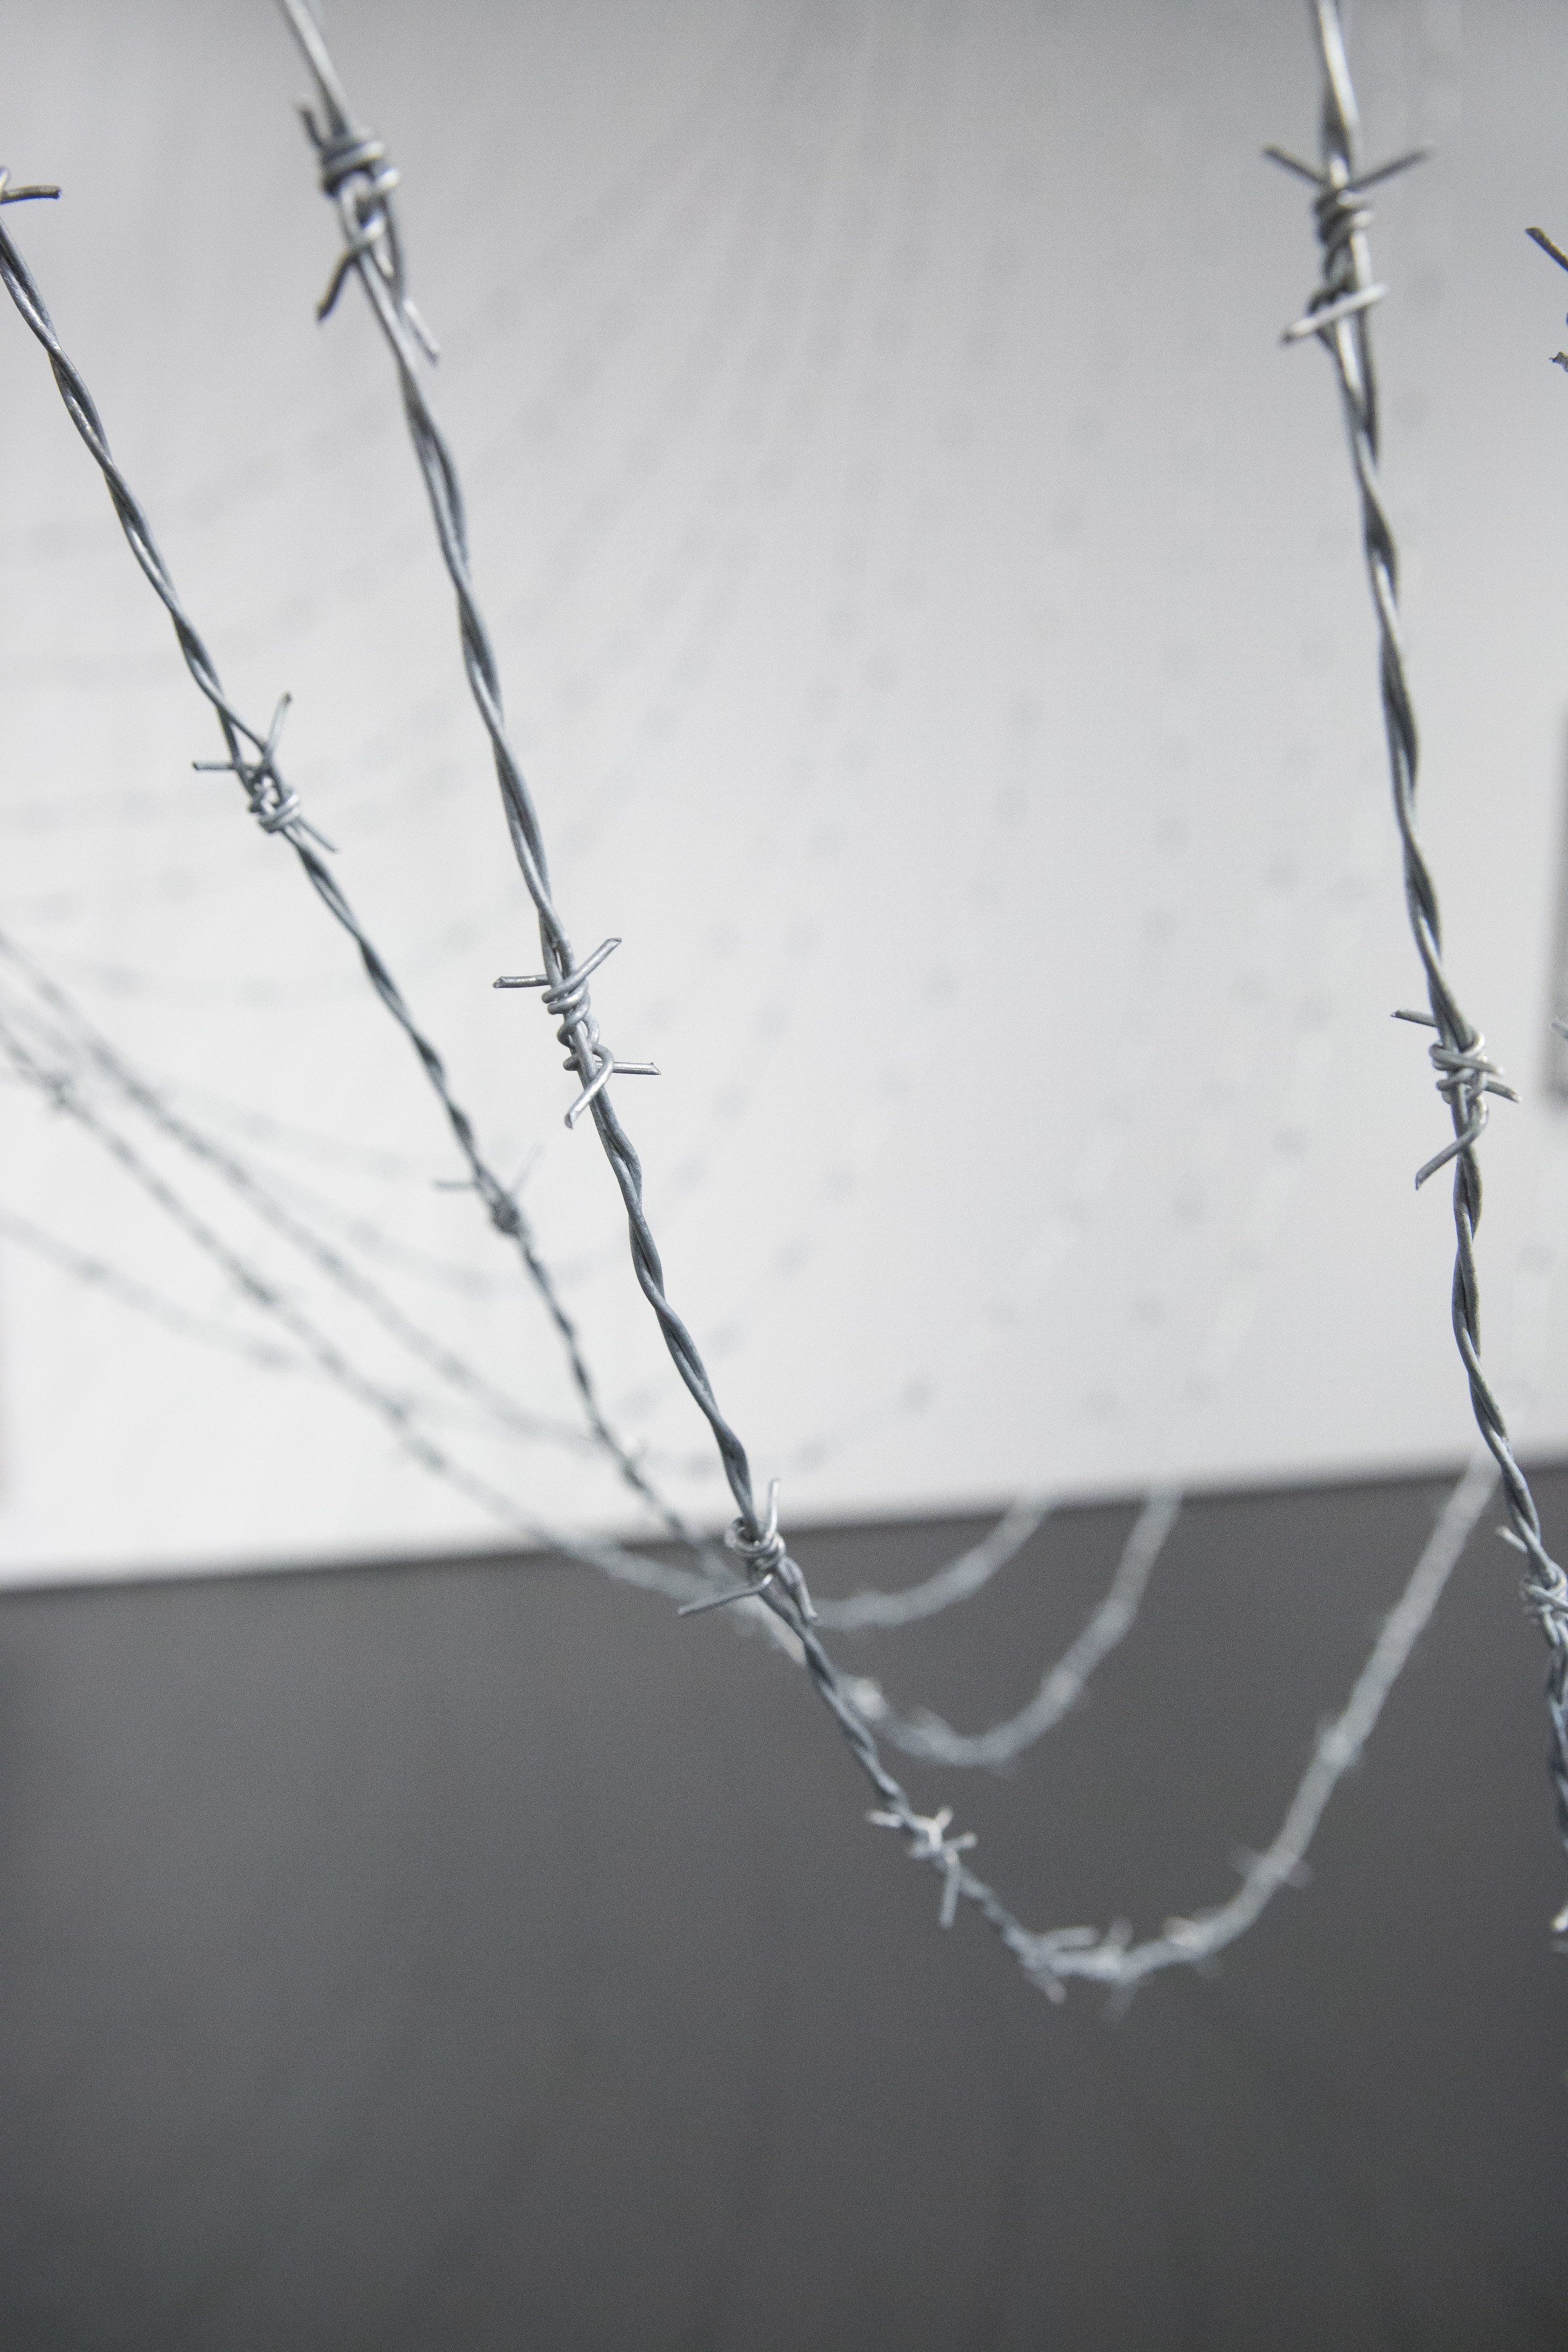 &quot;Look through minds mirror distance and measure time&quot; &ndash; Jayne Cortez, detail, 1970/, barbed wire, dimensions variable